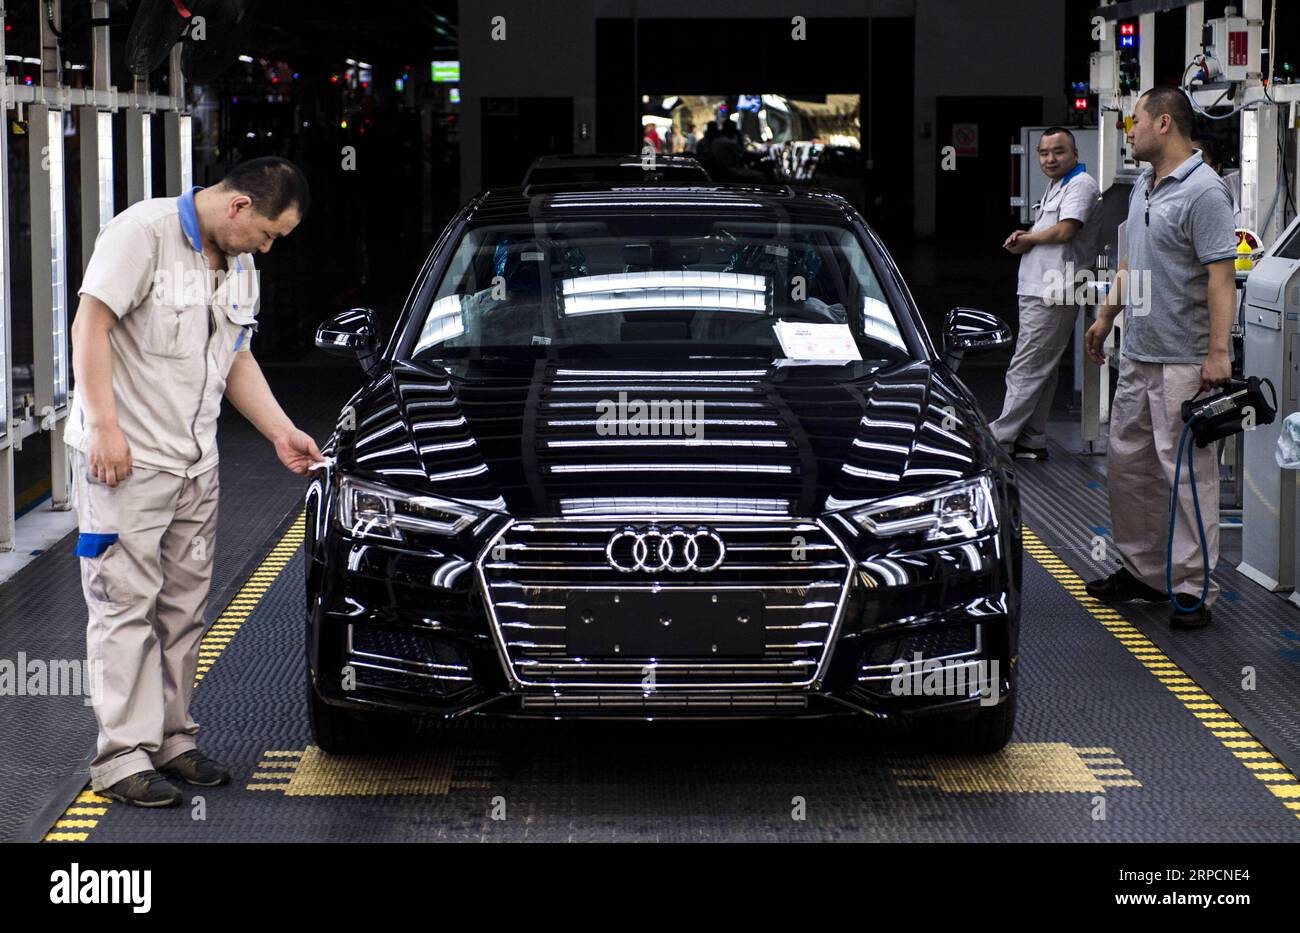 (190709) -- CHANGCHUN, July 9, 2019 -- Workers check an Audi car at FAW-Volkswagen factory in Changchun, northeast China s Jilin Province, July 9, 2019. The Sino-German auto joint venture FAW-Volkswagen said a record 311,871 Audi vehicles were sold in China in the first half of 2019, up 2.1 percent year-on-year. ) CHINA-JILIN-CHANGCHUN-AUDI-SALES RECORD XuxChang PUBLICATIONxNOTxINxCHN Stock Photo